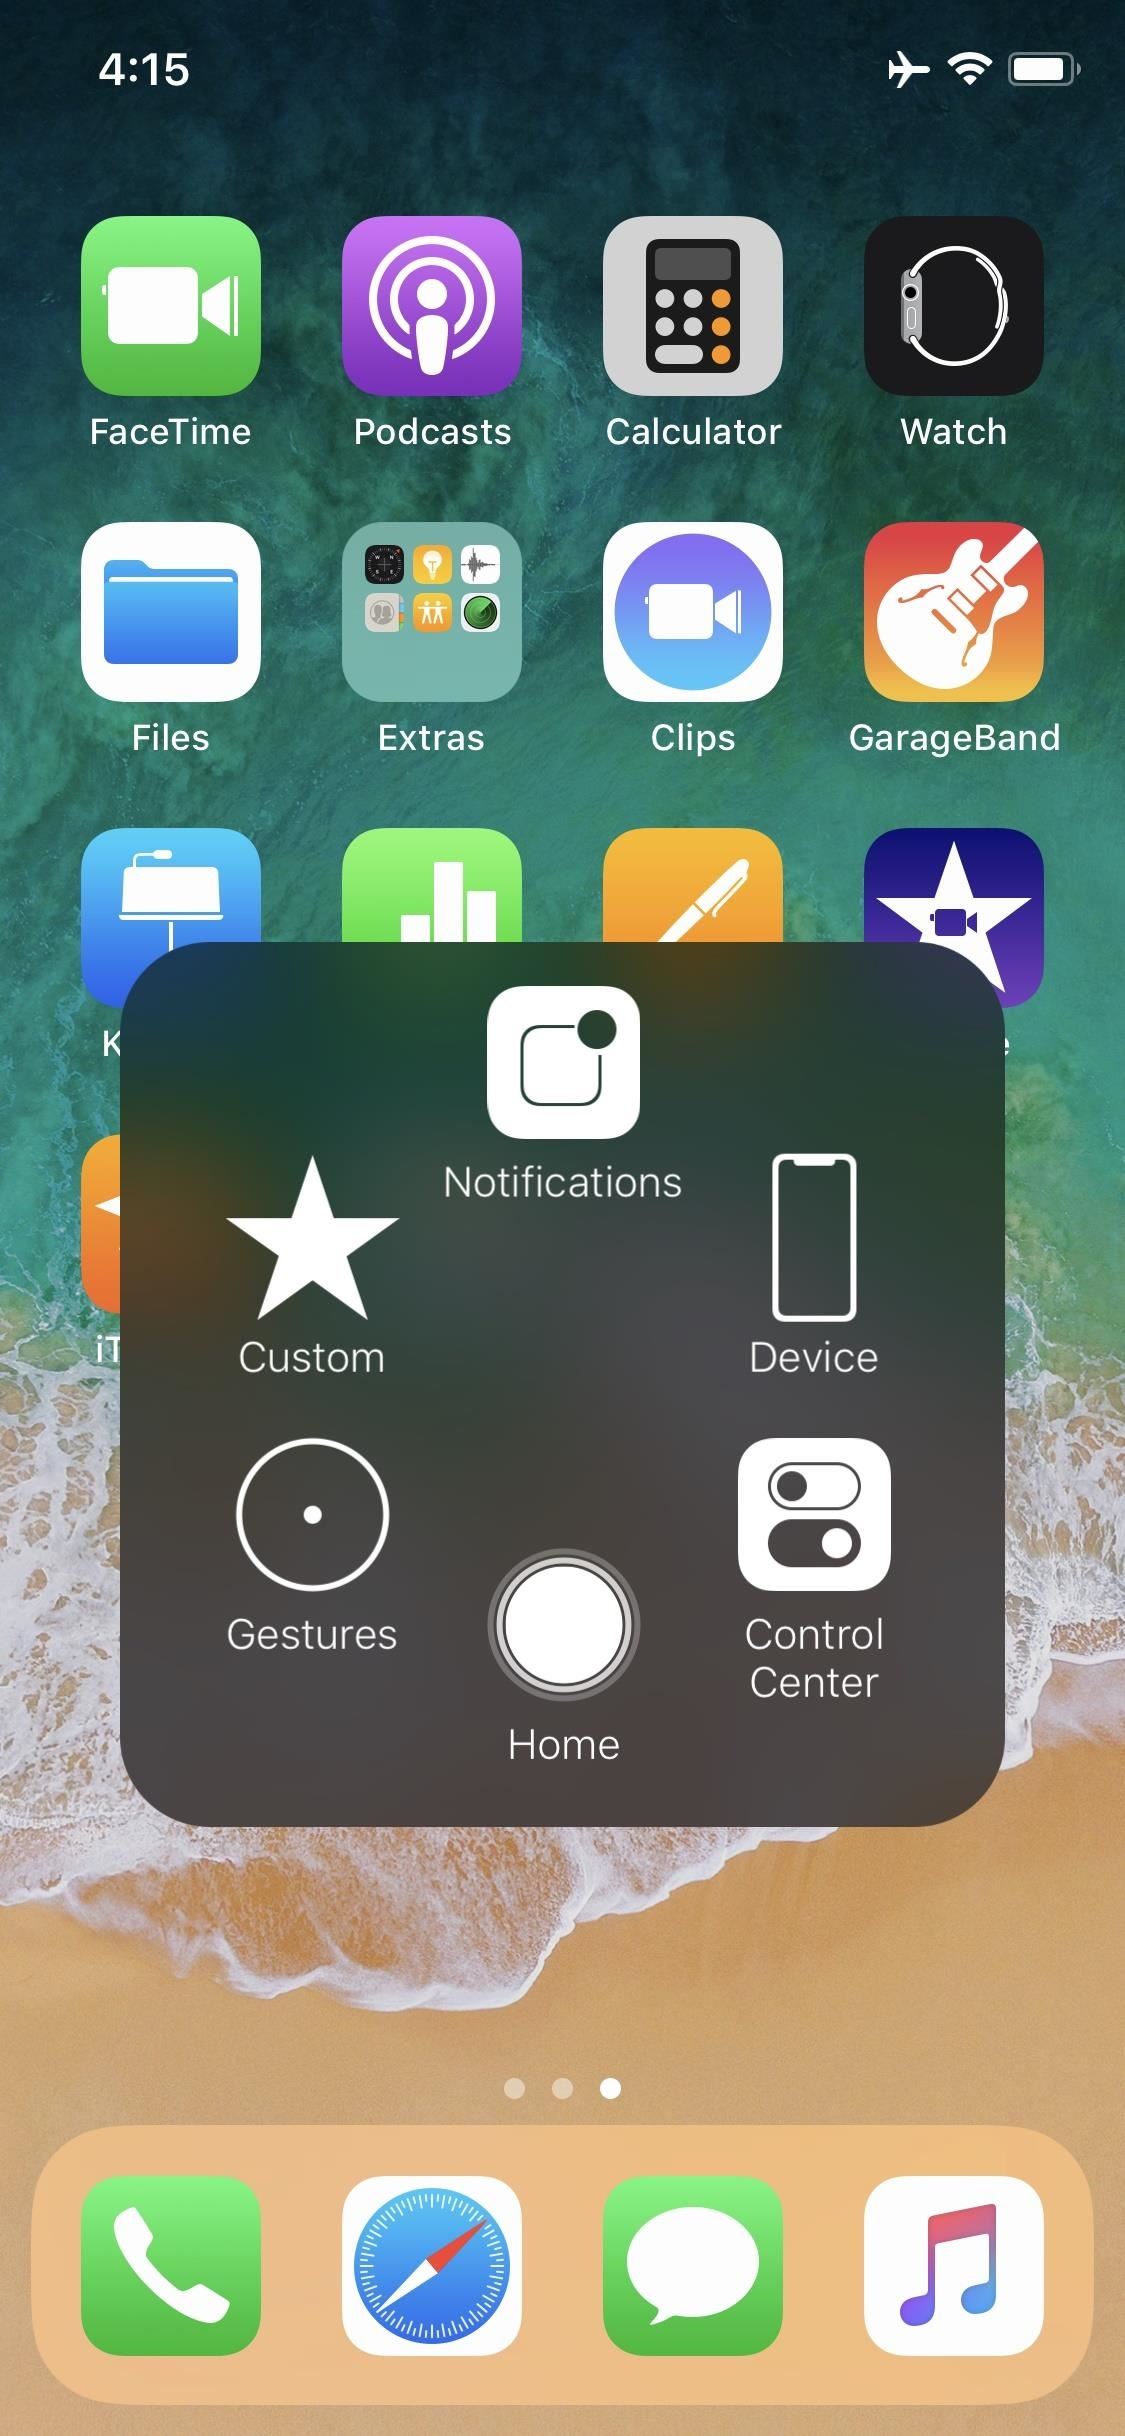 How to Add a Virtual Home Button to iPhone X with AssistiveTouch